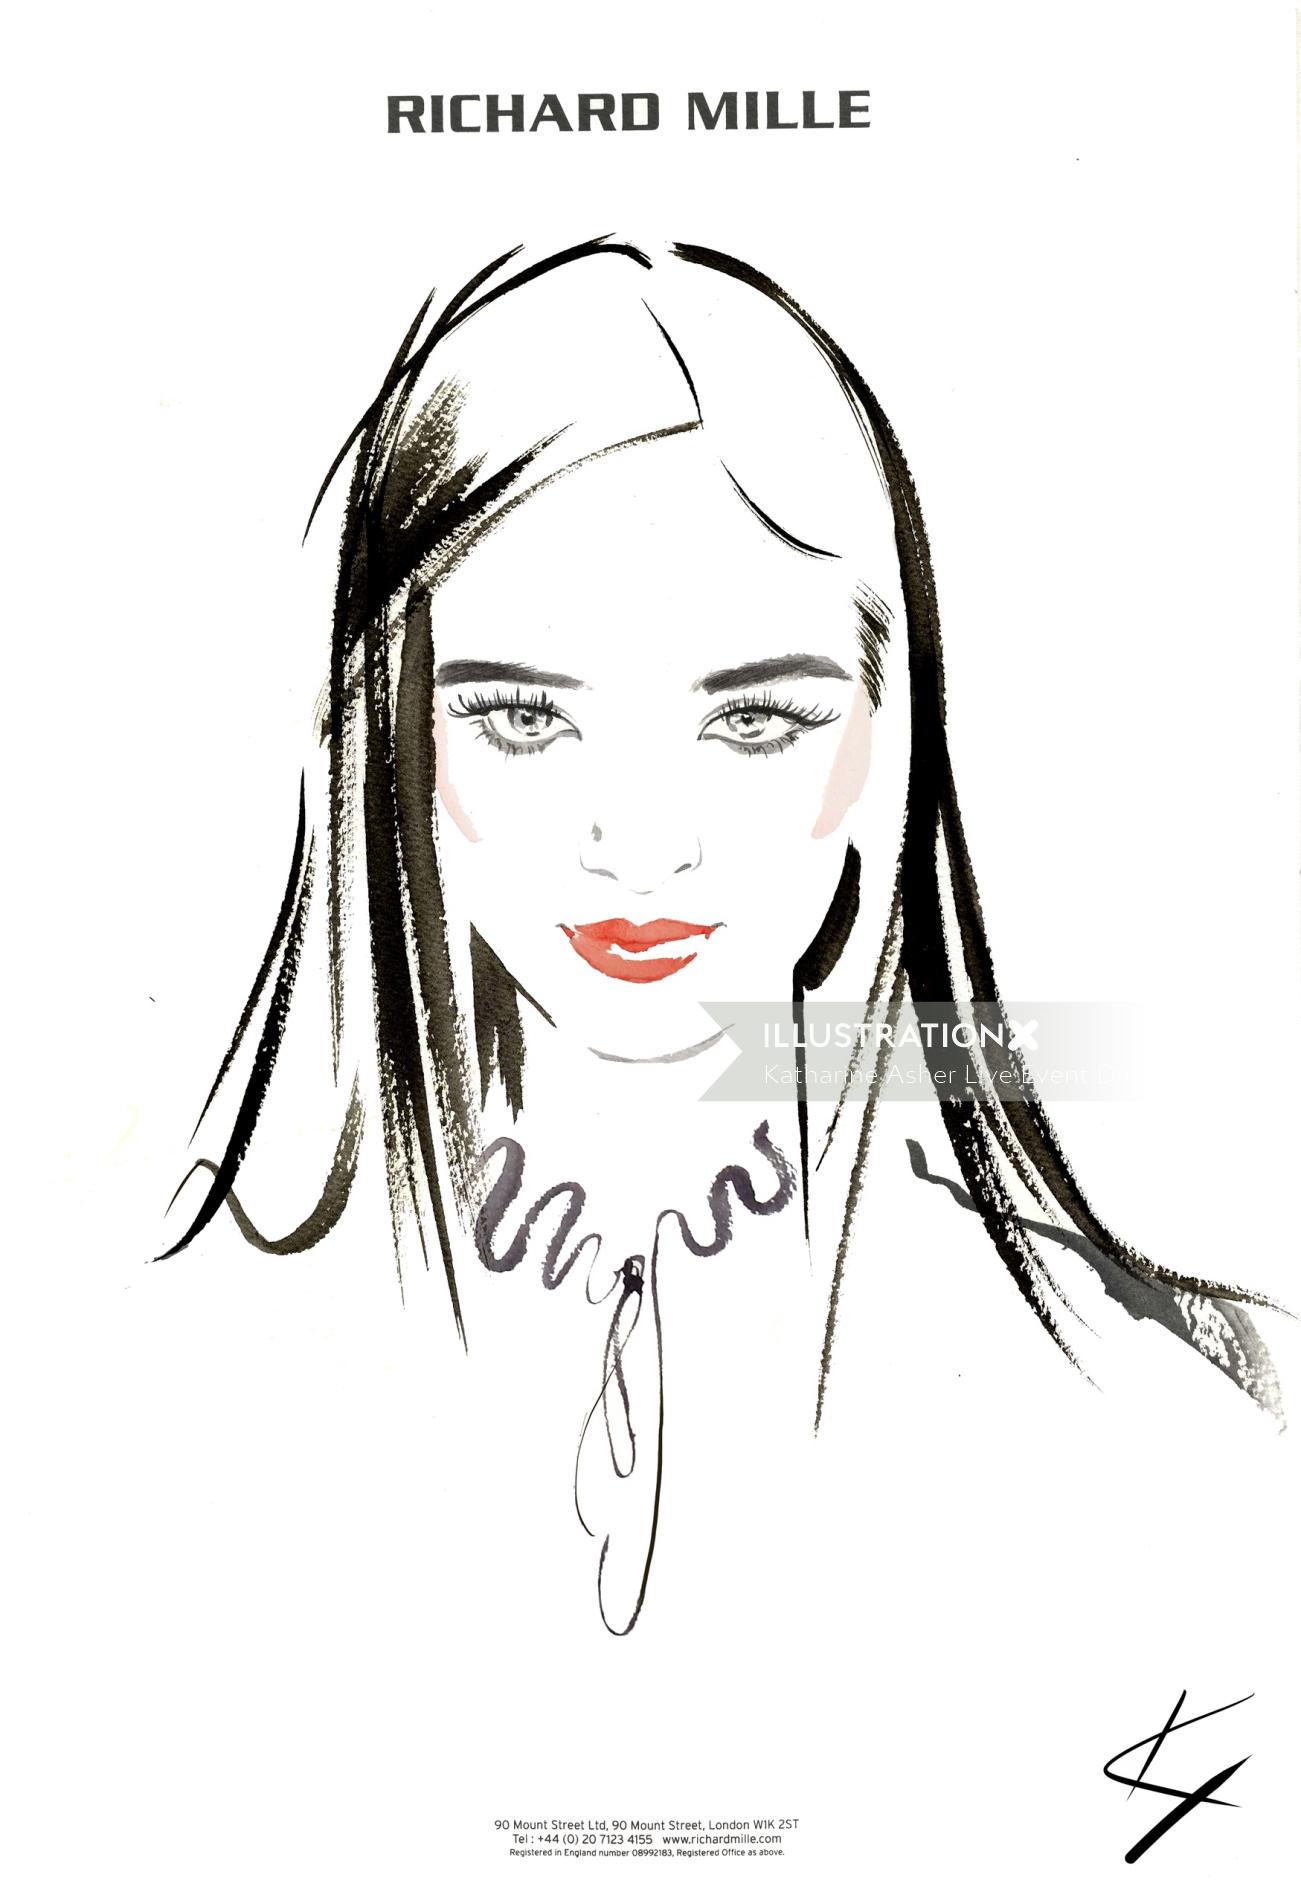 Richard Mille Live event drawing
